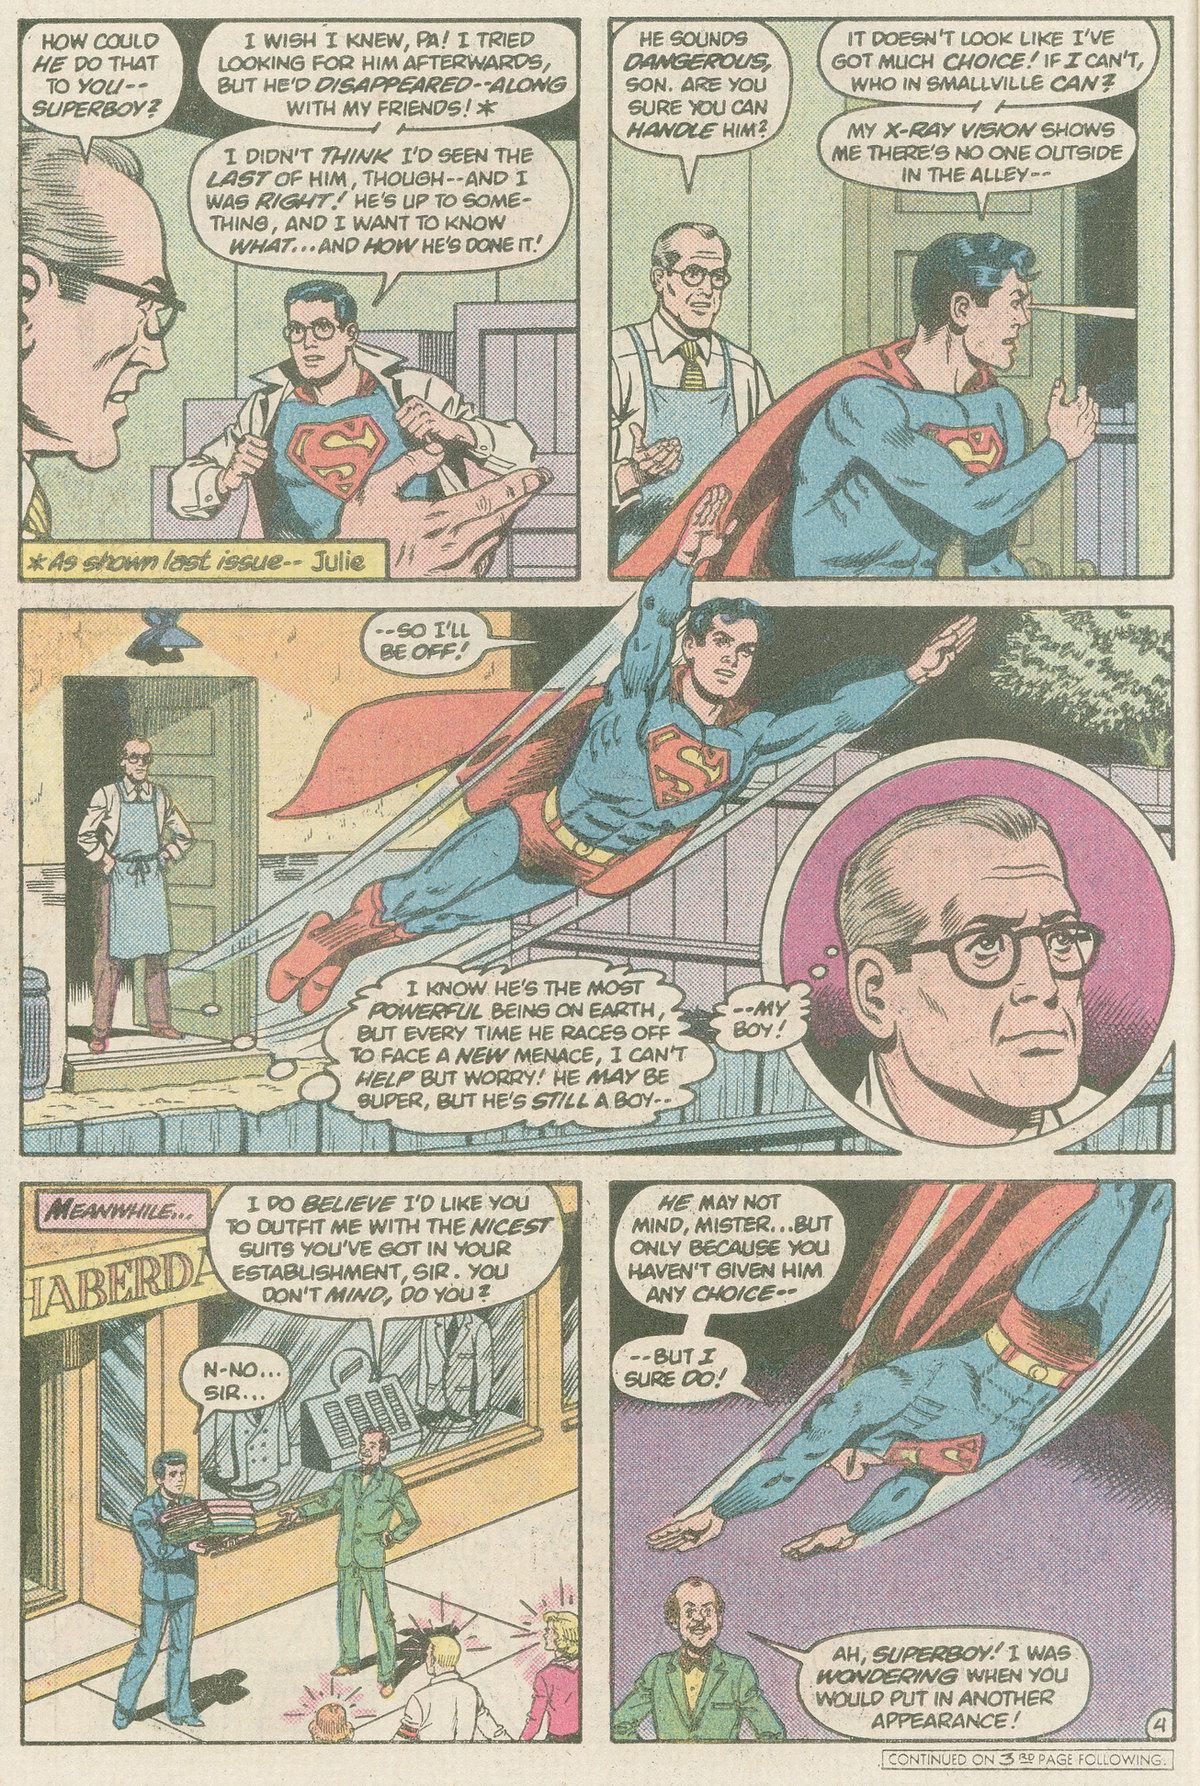 The New Adventures of Superboy 37 Page 4